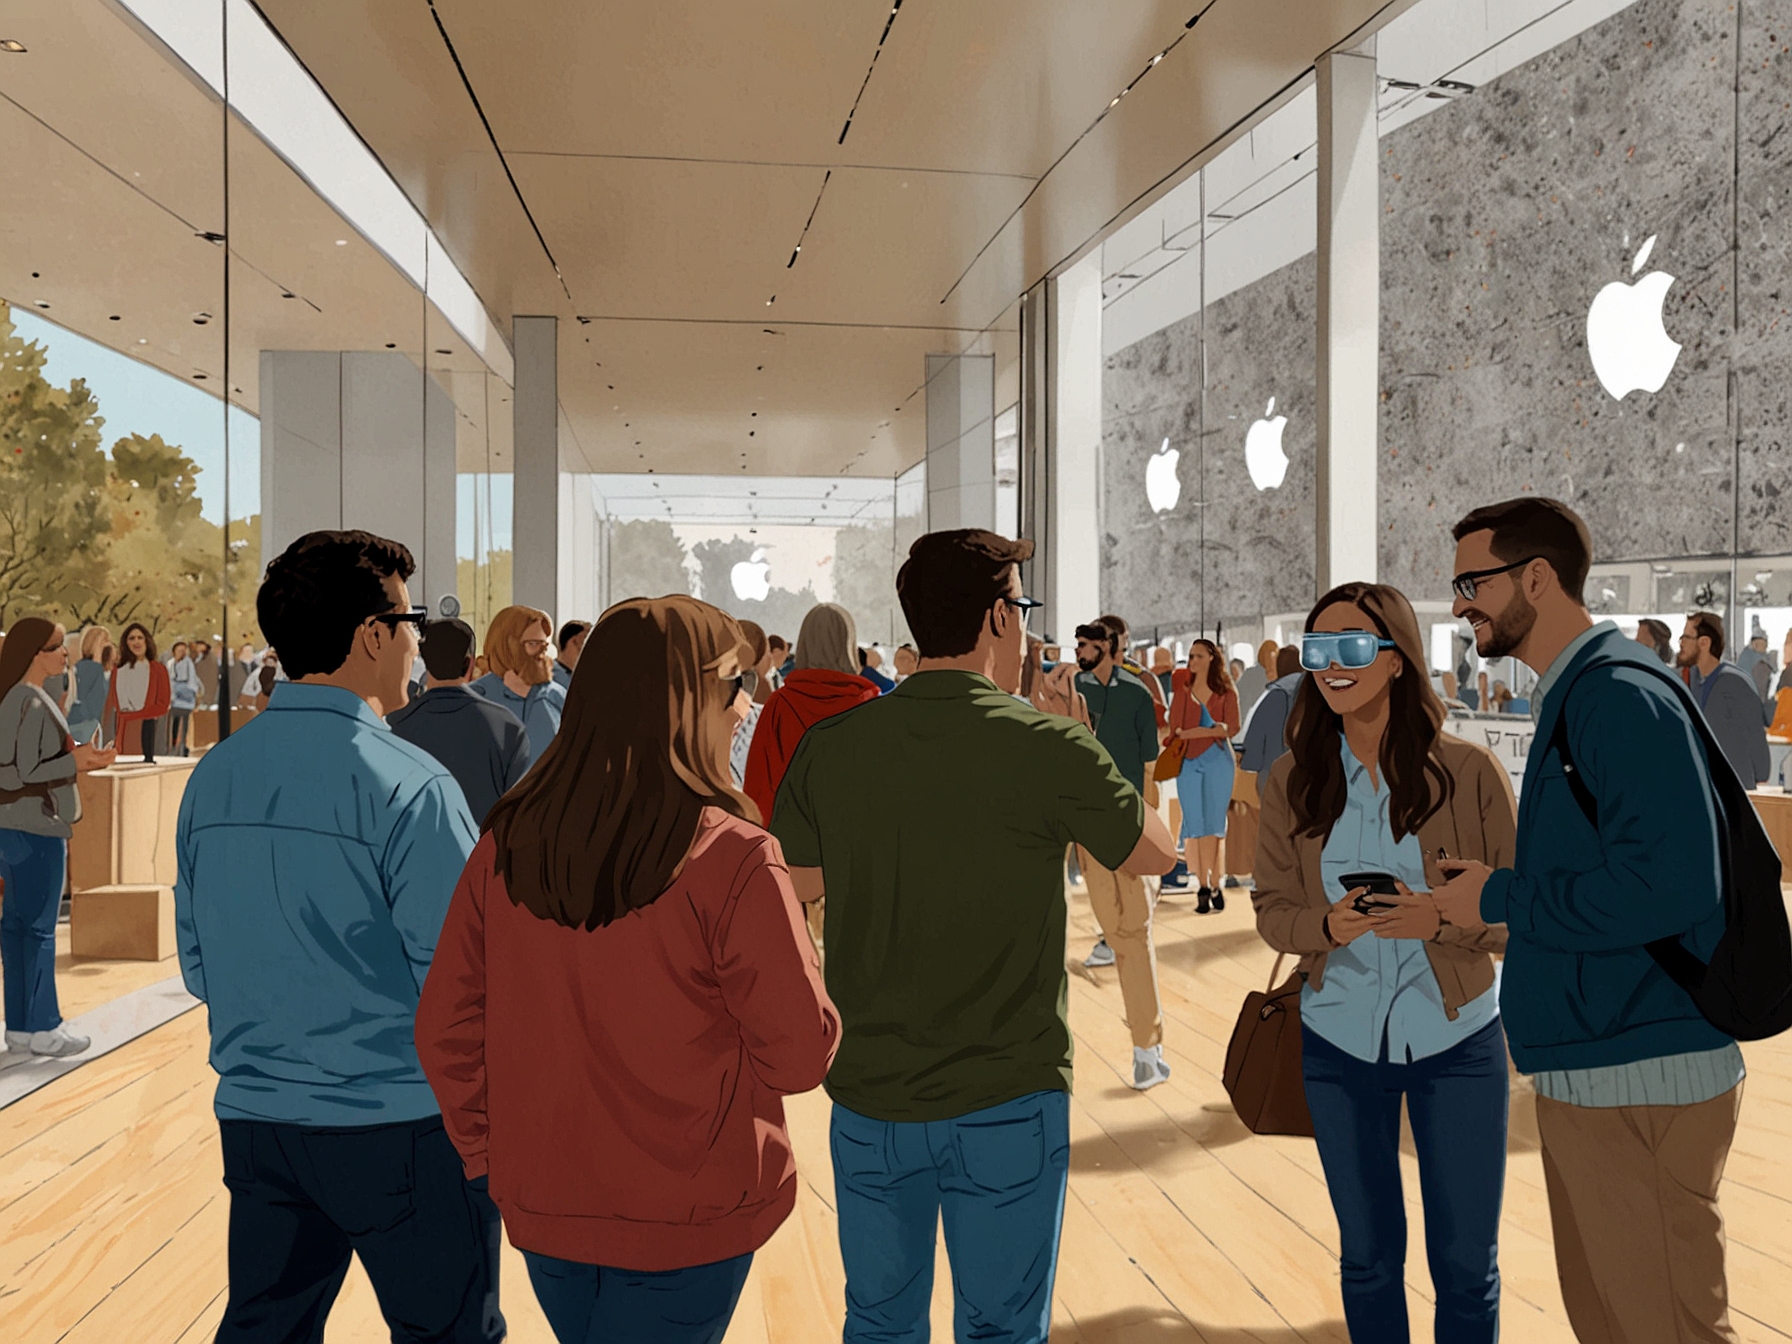 Excited customers outside an Apple Store with posters of the Apple Vision Pro, showcasing the high anticipation and buzz surrounding the technologically advanced AR/VR headset.